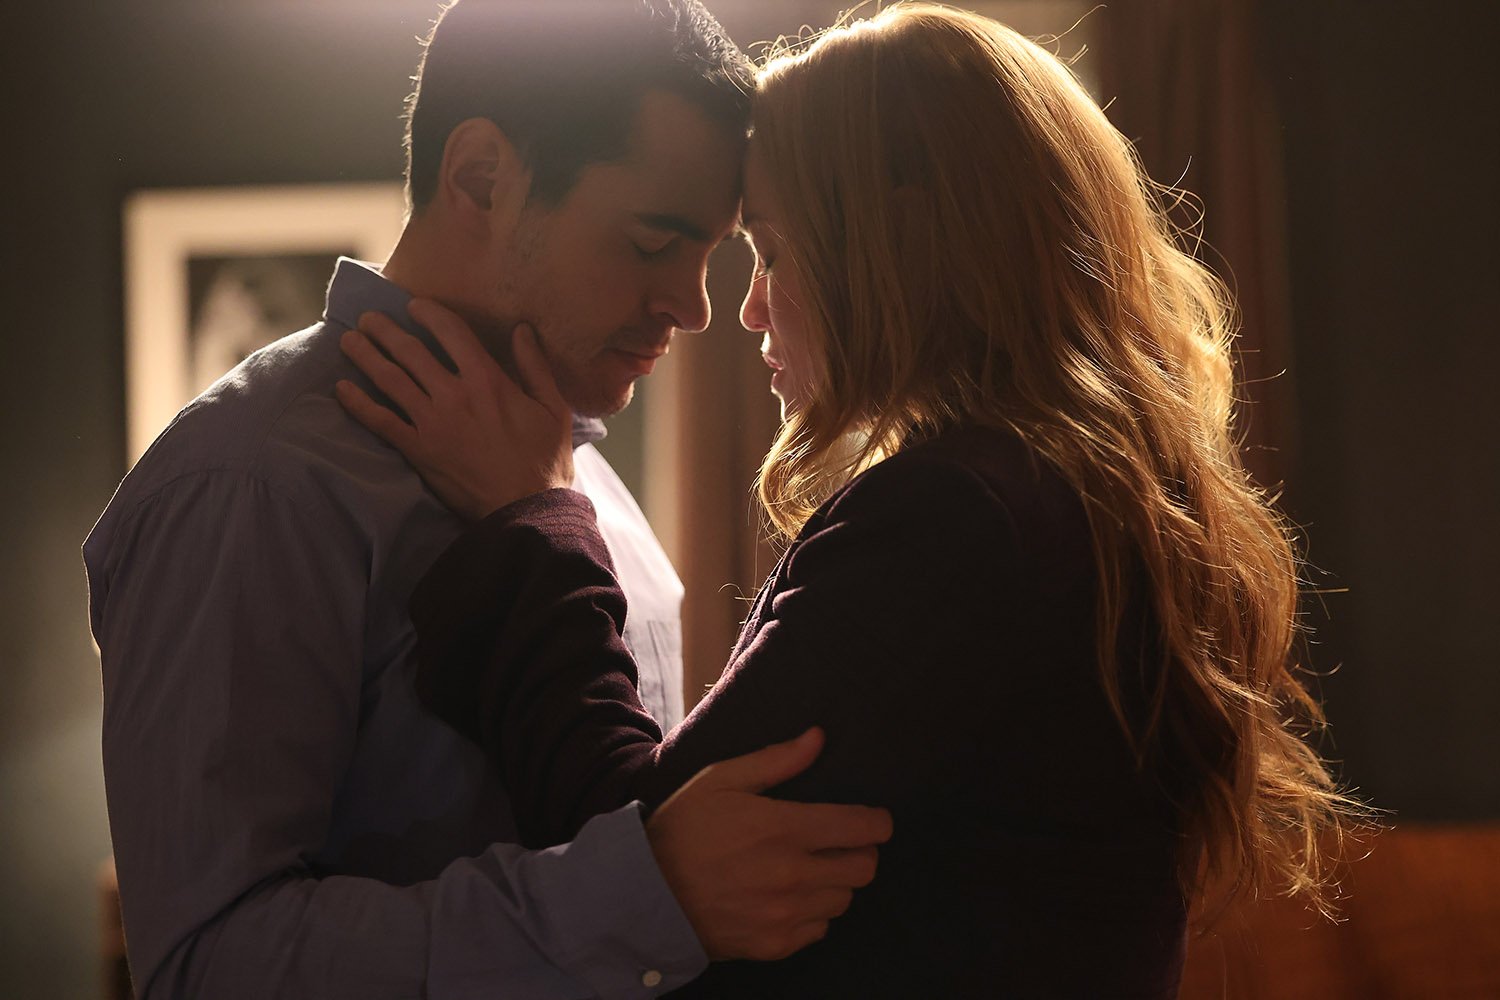 Ramón Rodriguez as Will Trent and Erika Christensen as Angie embracing on Will Trent